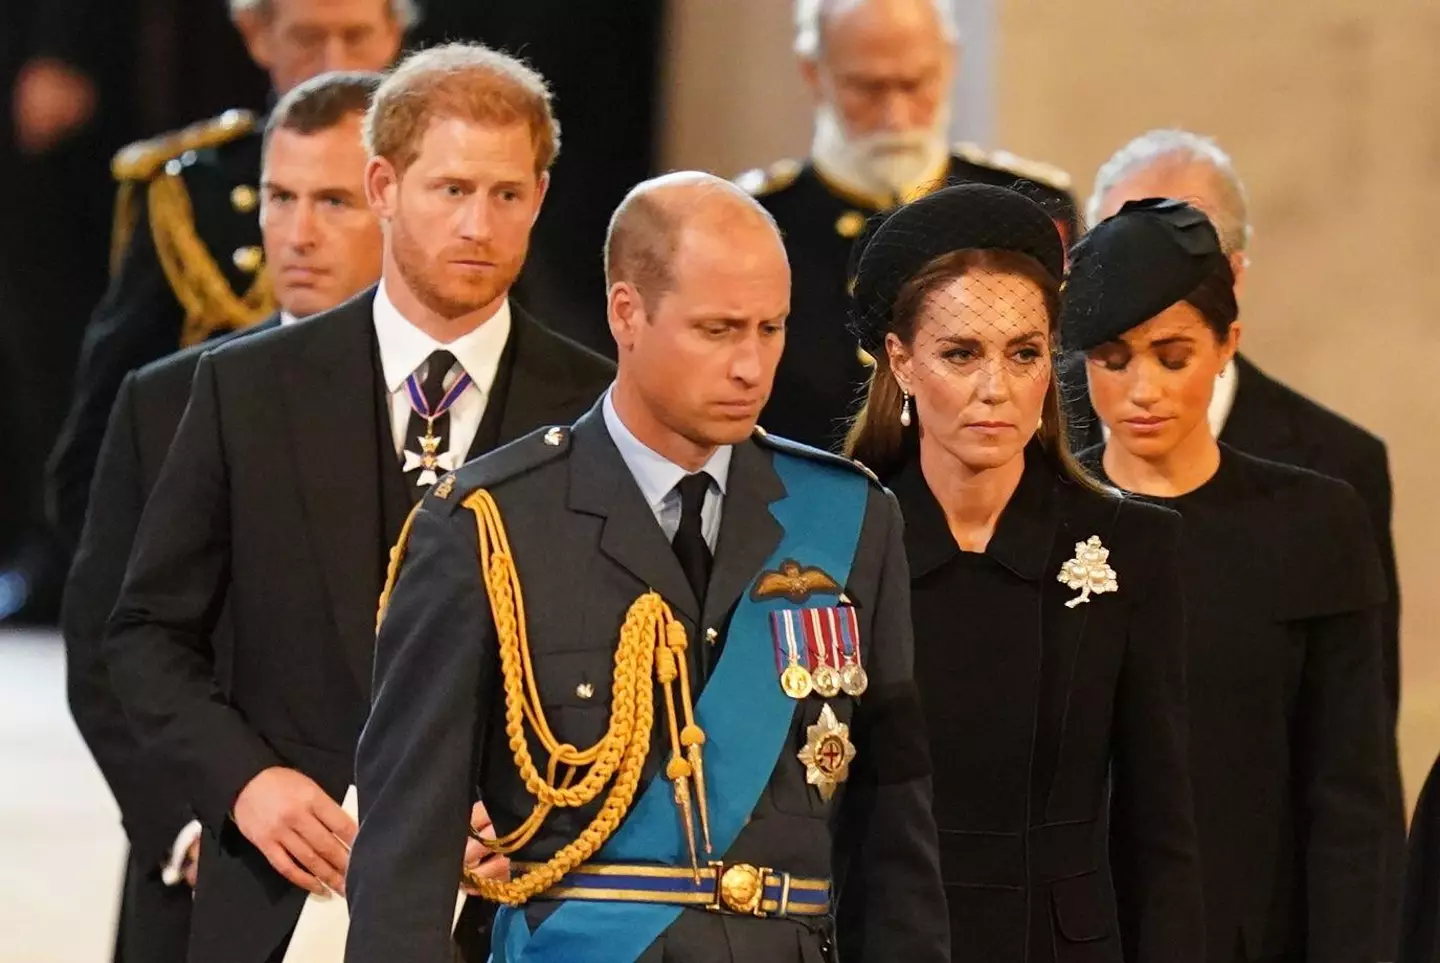 Certain clips from Queen Elizabeth II's funeral will never be aired again.